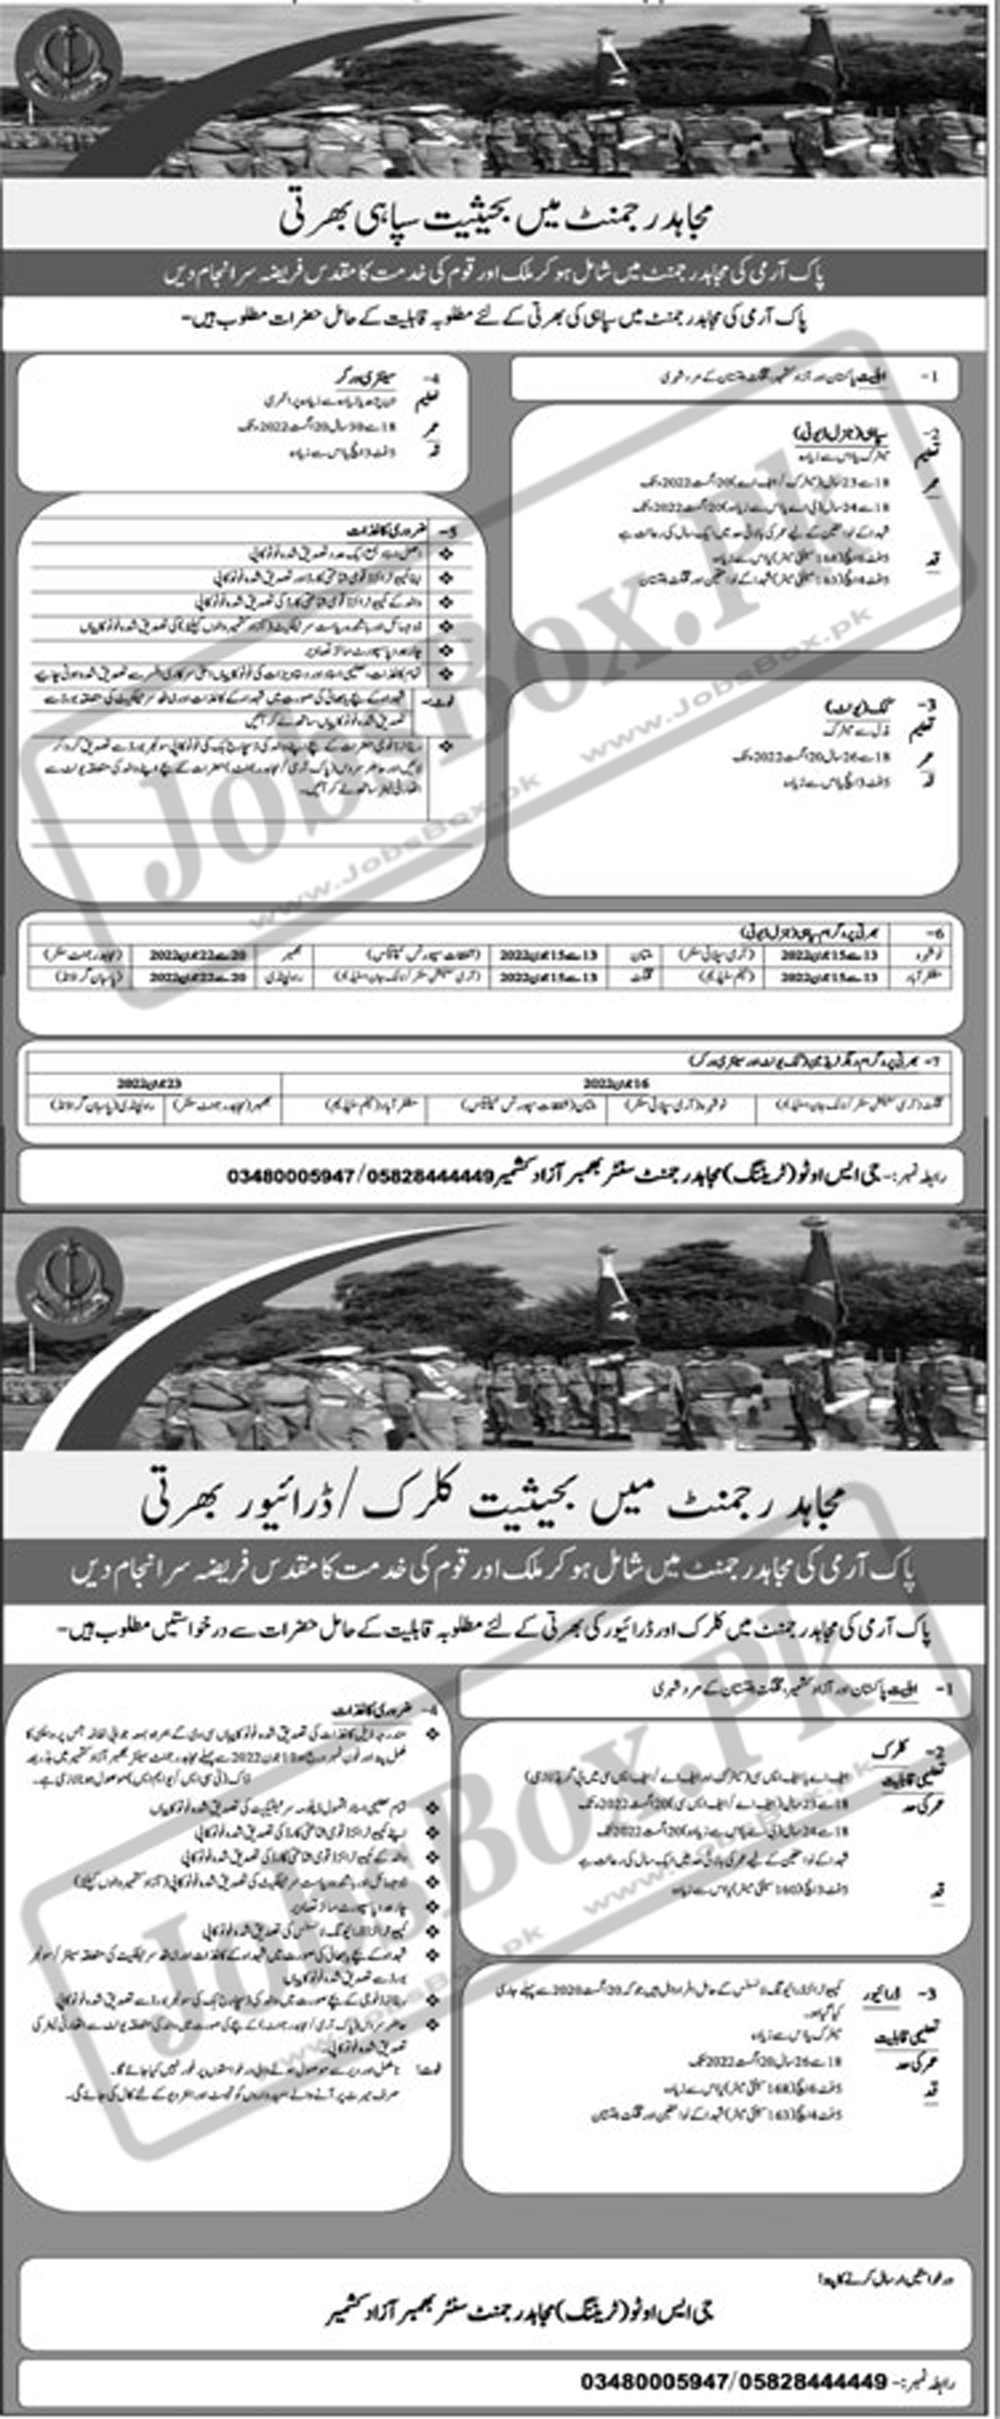 Join Pak Army Jobs 2022 in Mujahid Regiment for Soldier, Clerk & Driver